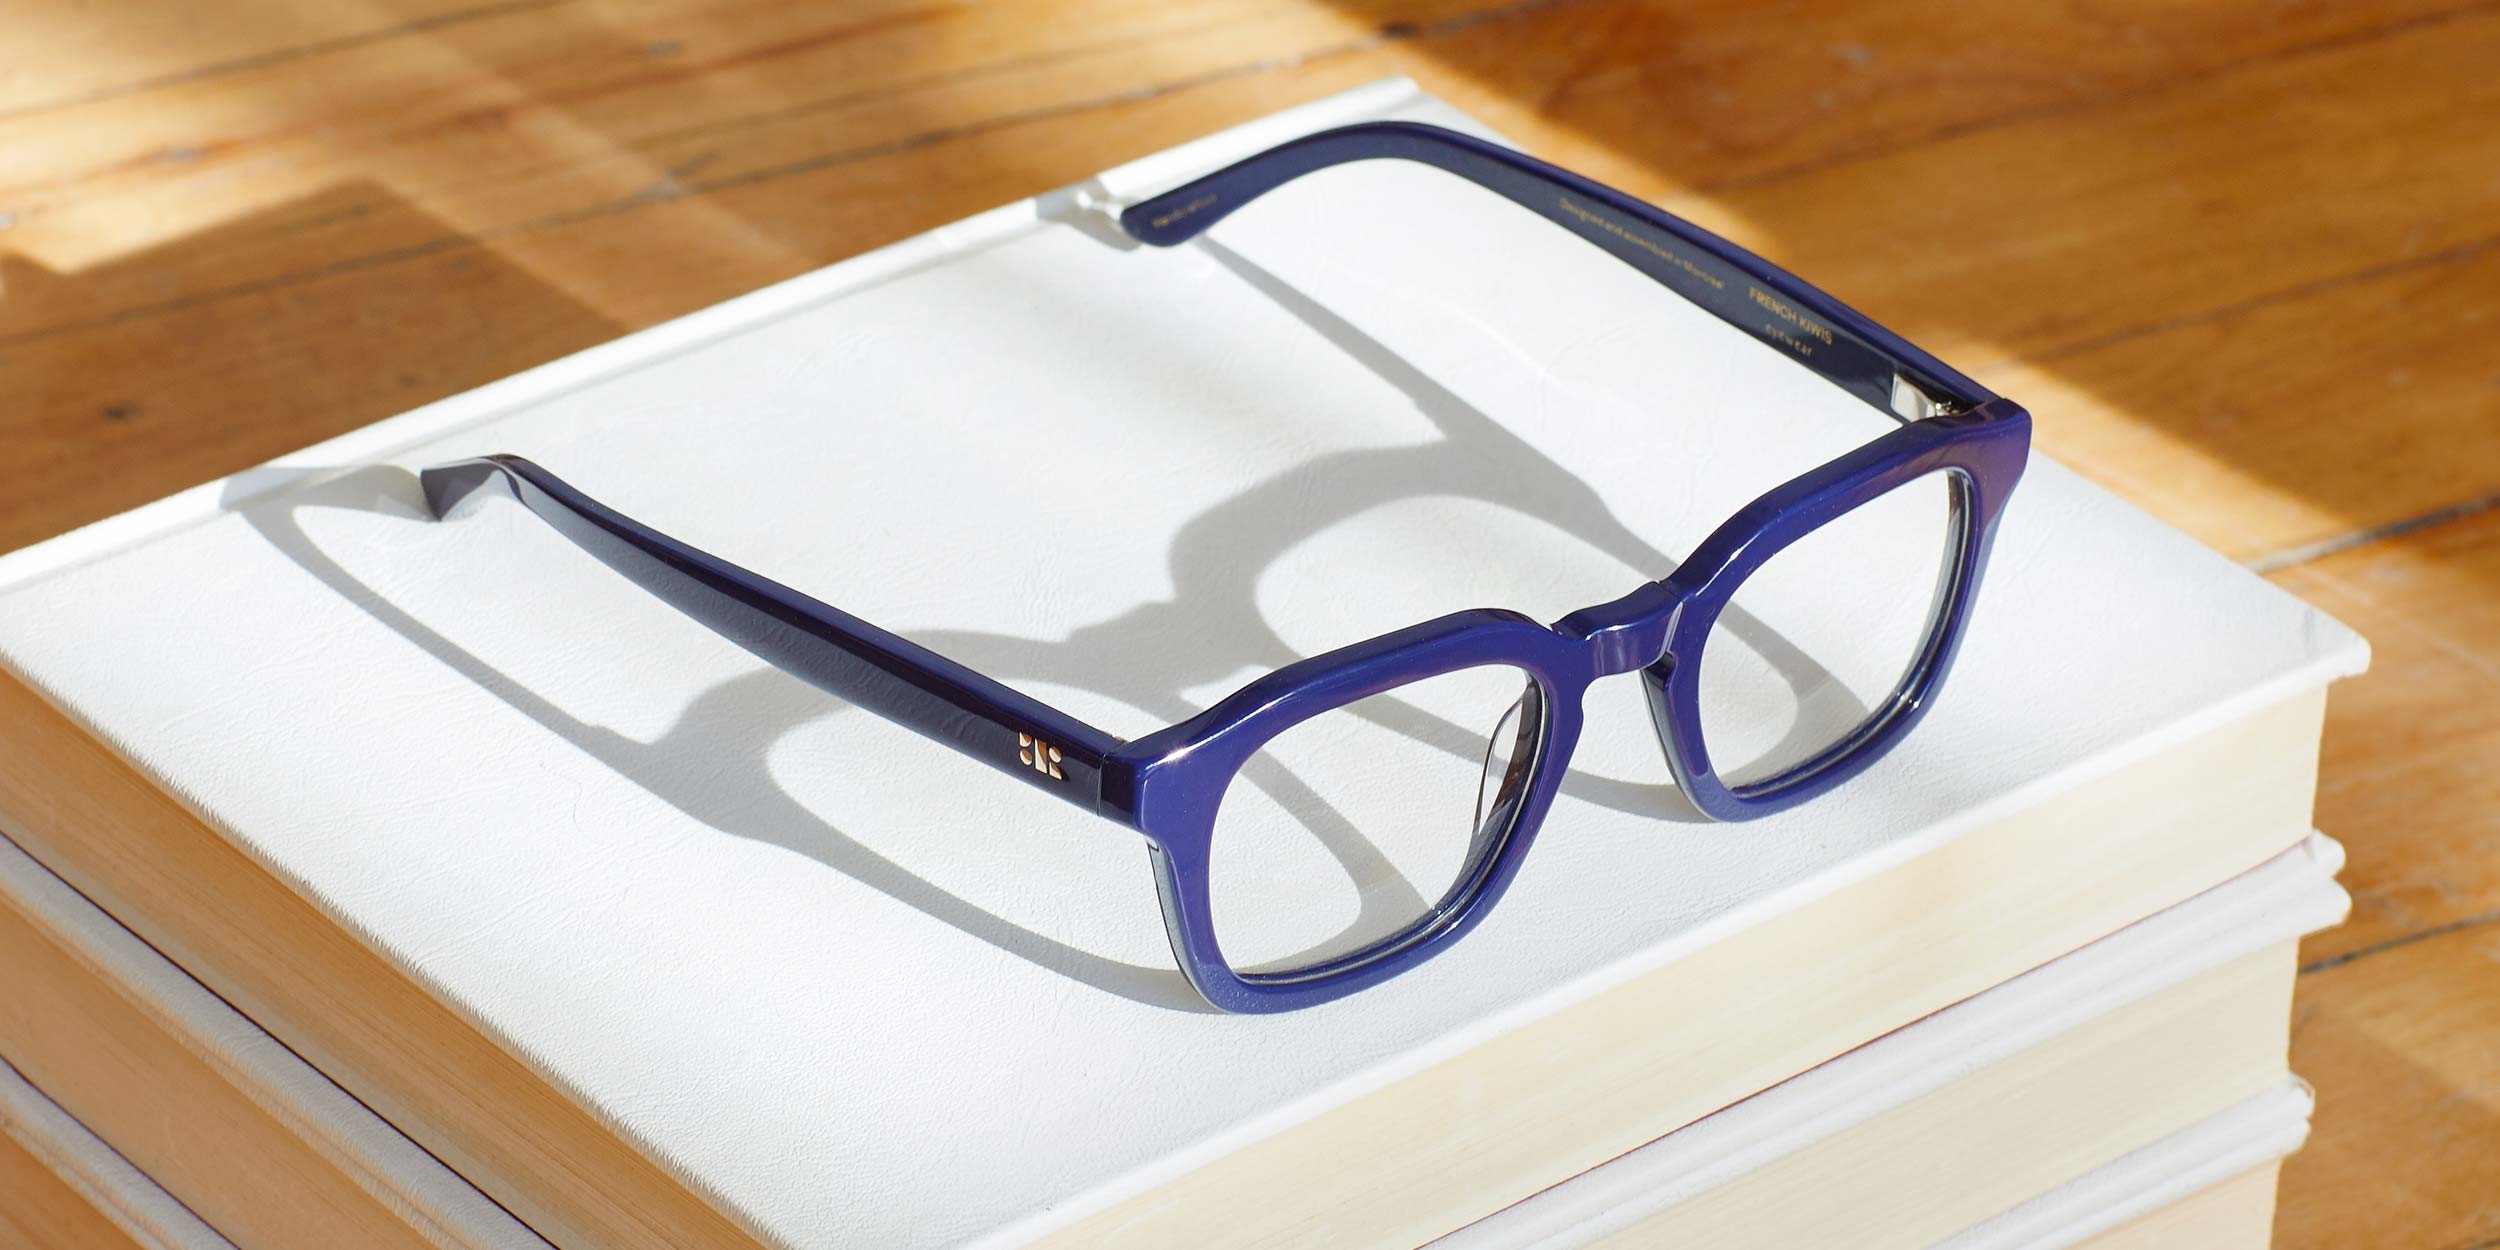 Photo Details of Oscar Cognac Reading Glasses in a room